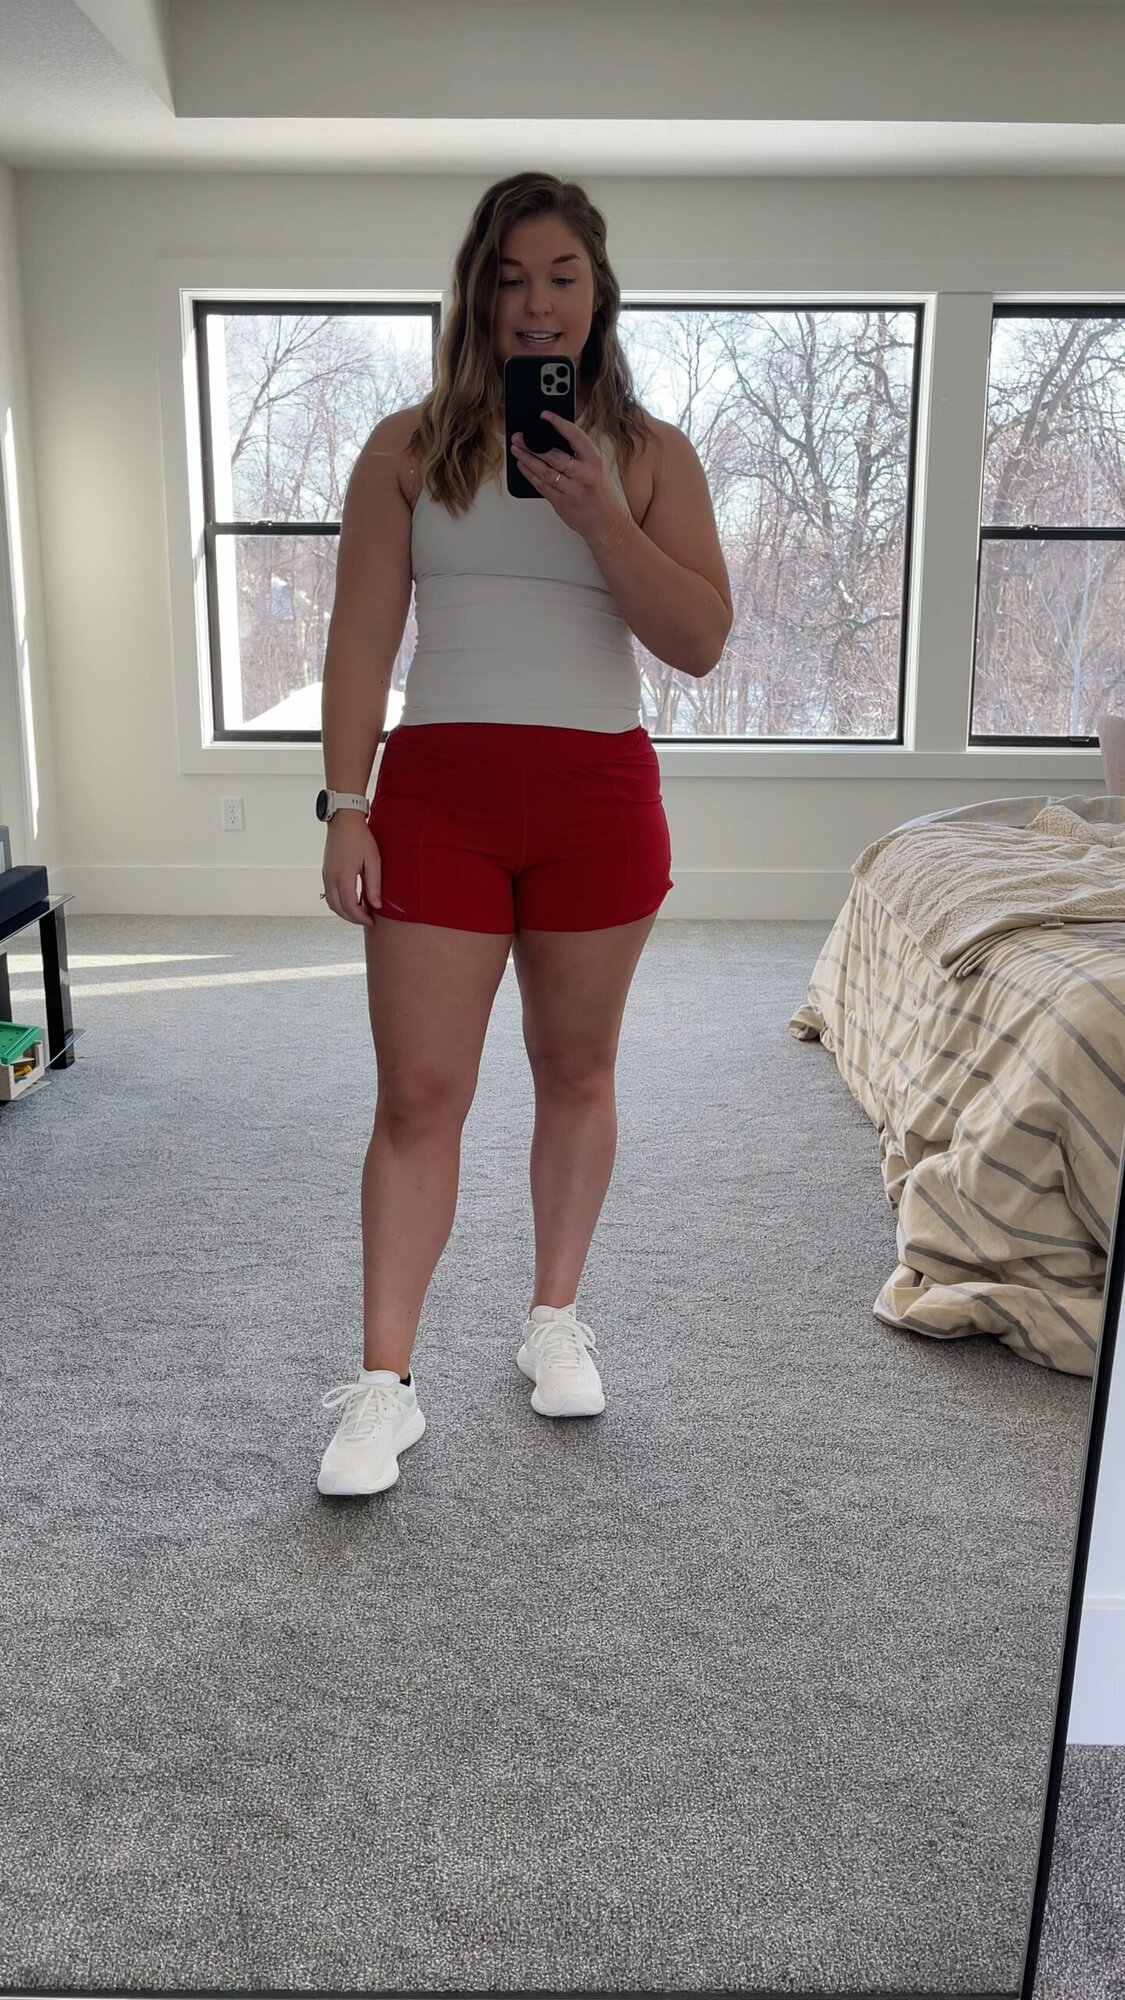 lemon loves blog lululemon fit review hotty hot shorts run gym activewear —  Be Foxy Fit - improve mobility, relieve tension, reduce stress through  mindful movement